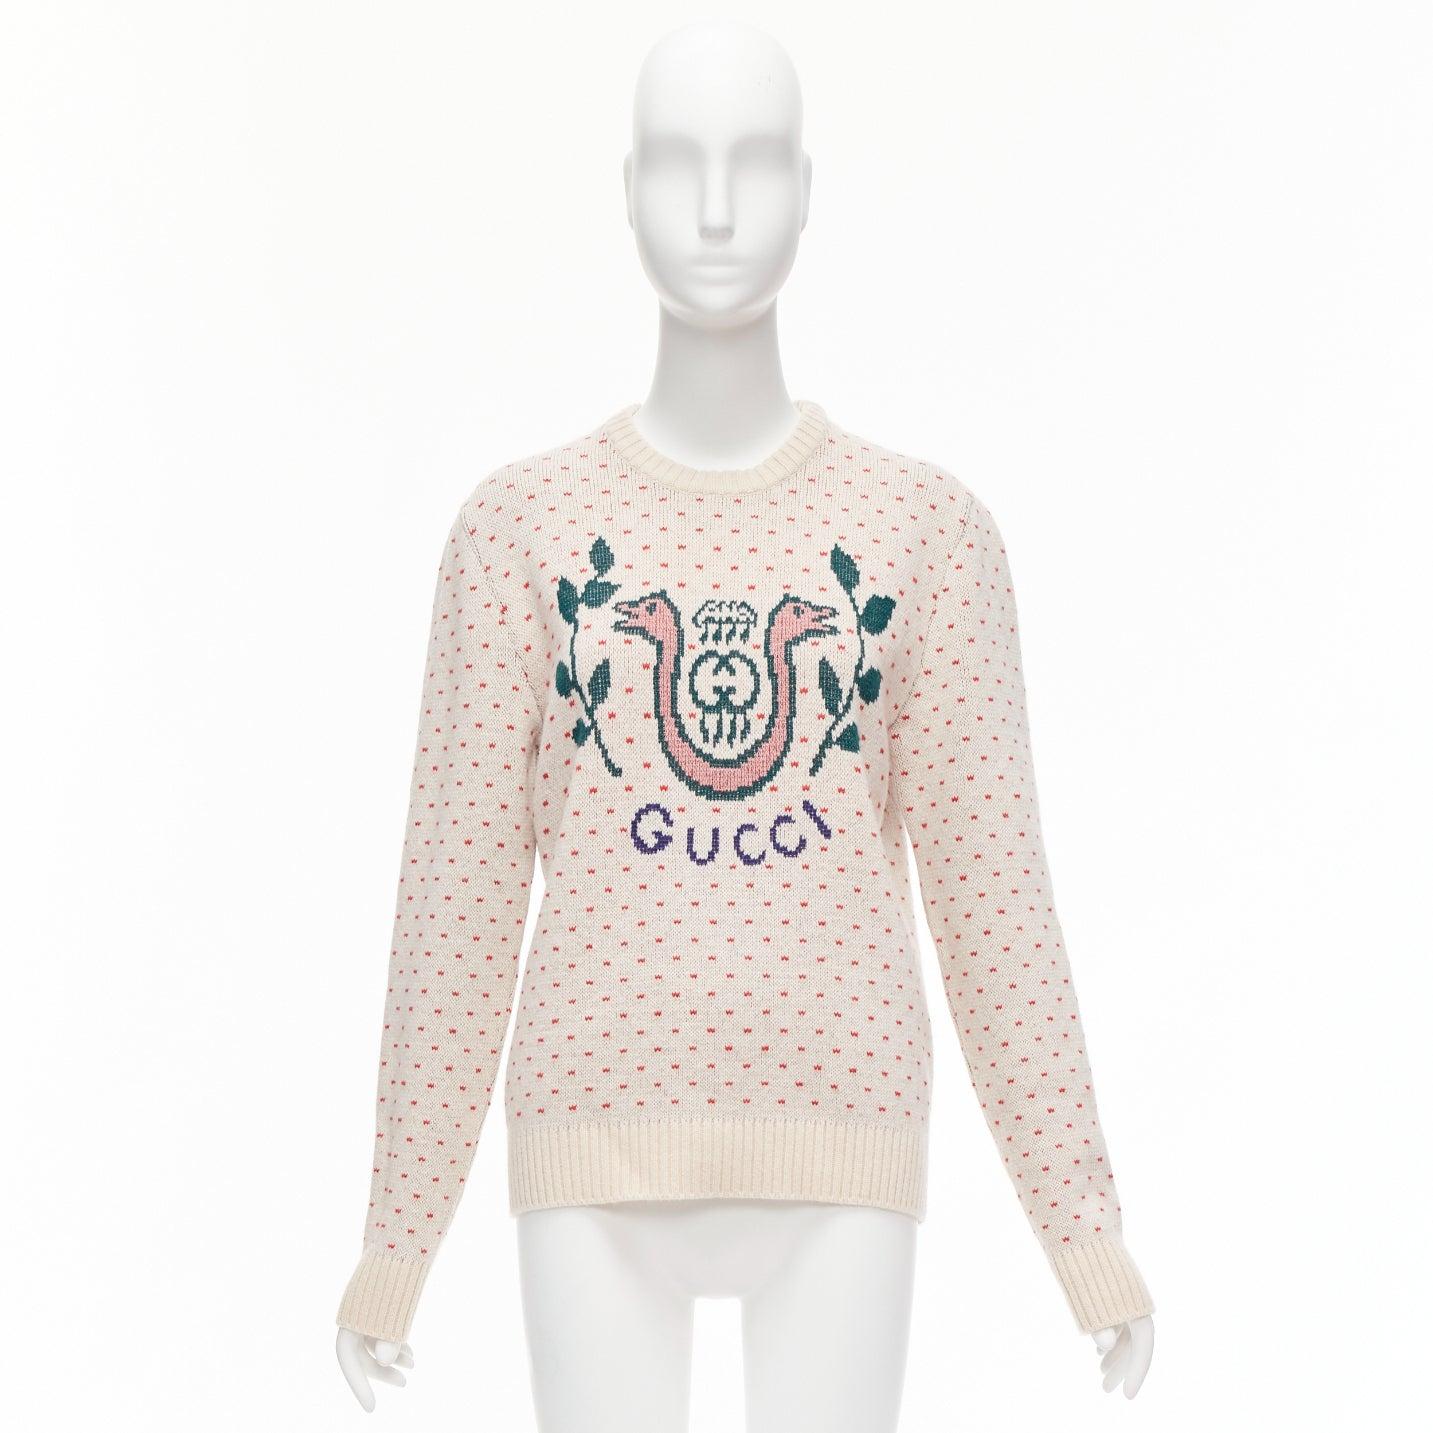 GUCCI 100% wool cream red fairisle vintage Crest logo intarsia sweater top XS For Sale 5